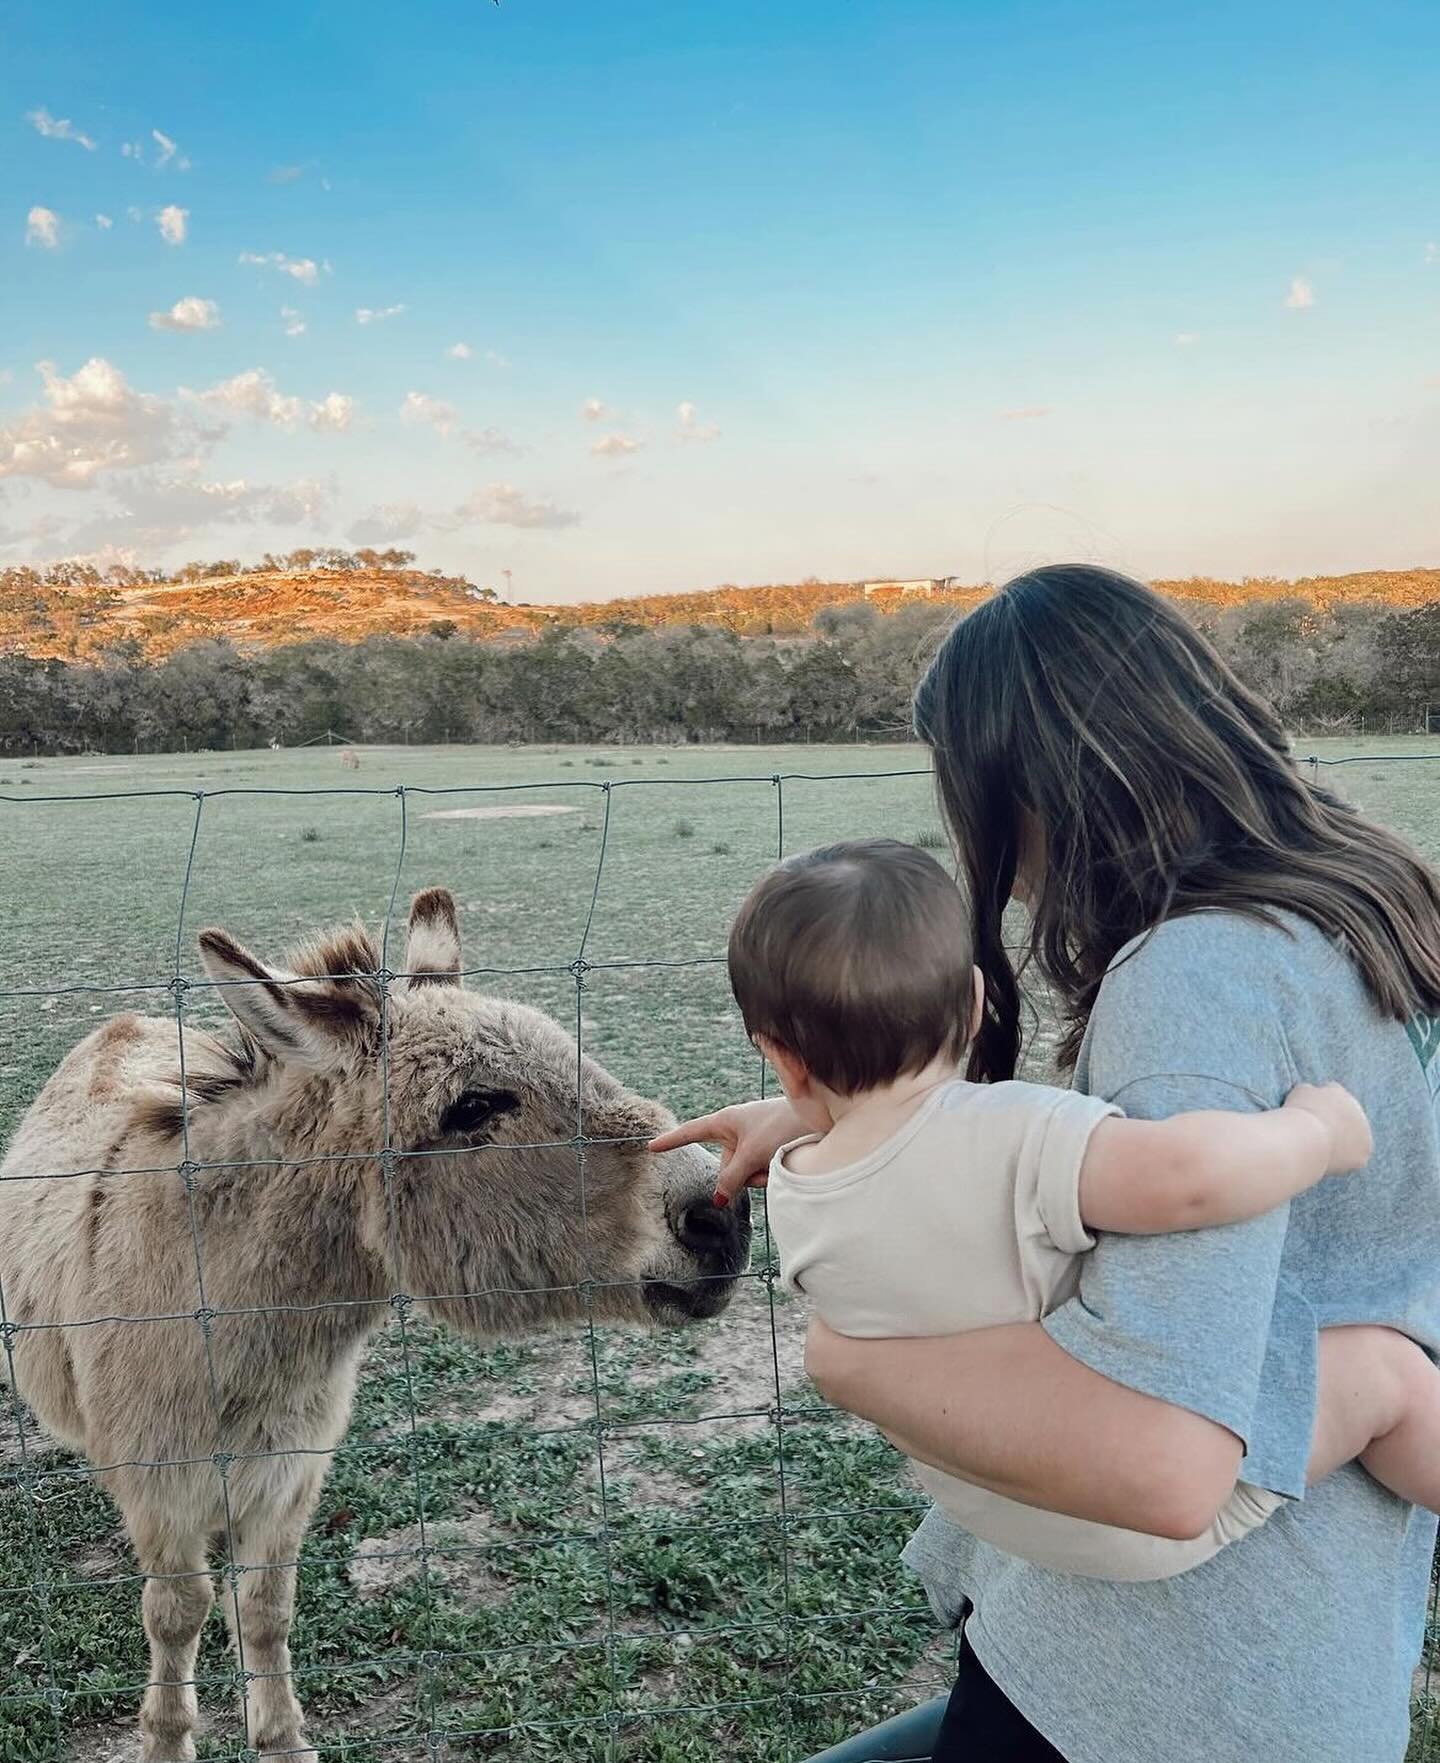 Making friends with the sweet donkeys at Cedar Haus 💗 Thanks for sharing these snap from your stay @theofficialtorivega_!